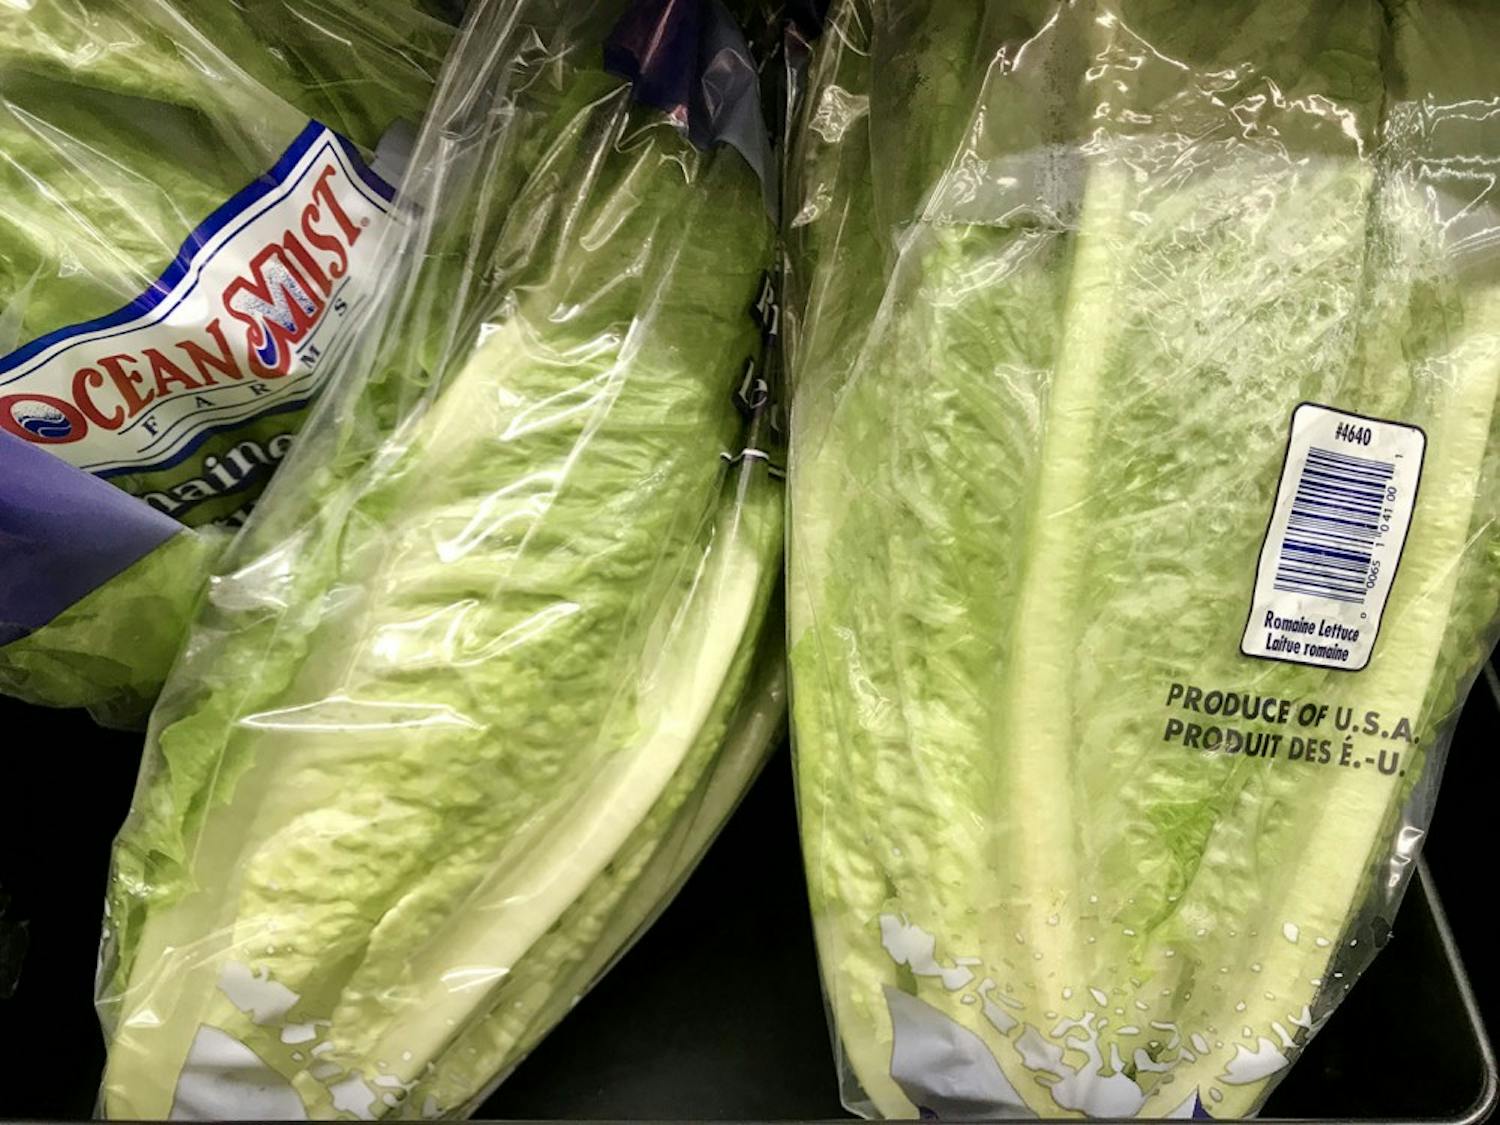 UB pulls chopped romaine lettuce and finds a new supplier amid multistate E. coli outbreak linked to the Yuma, Arizona growing region.